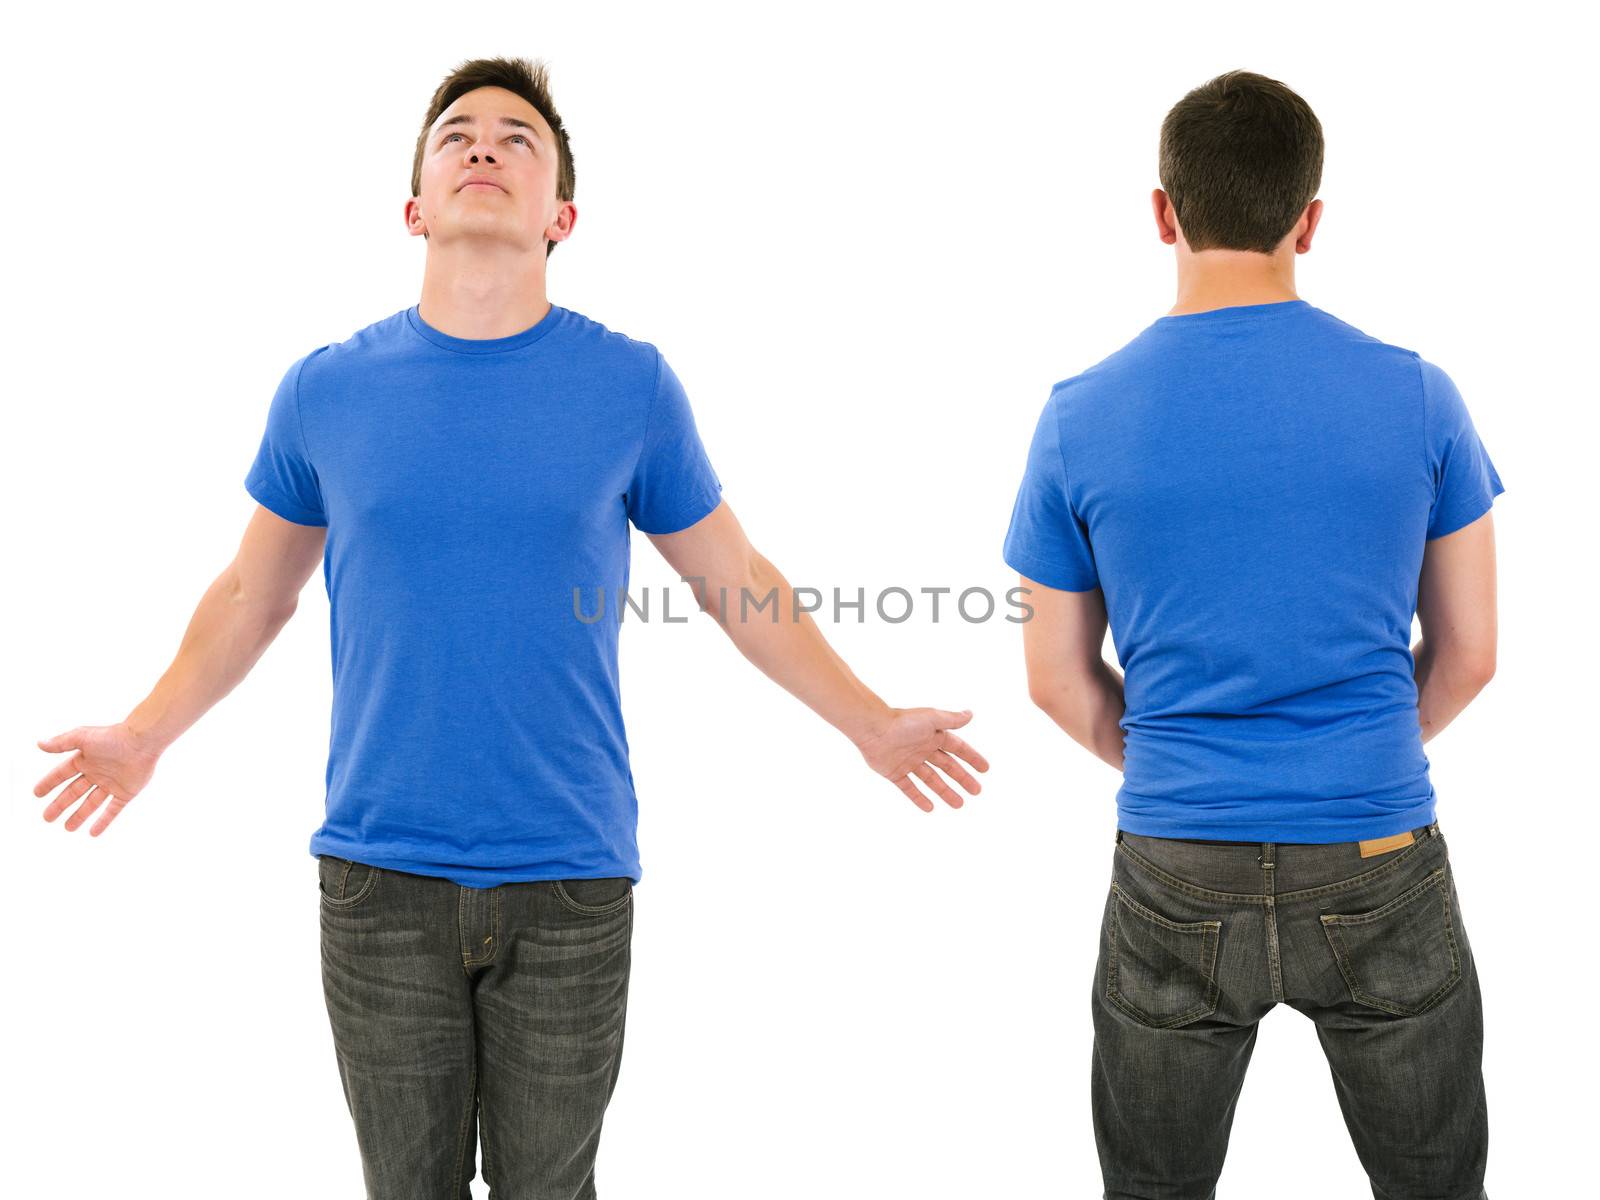 Photo of a male in his late teens posing with a blank blue shirt.  Front and back views ready for your artwork or designs.